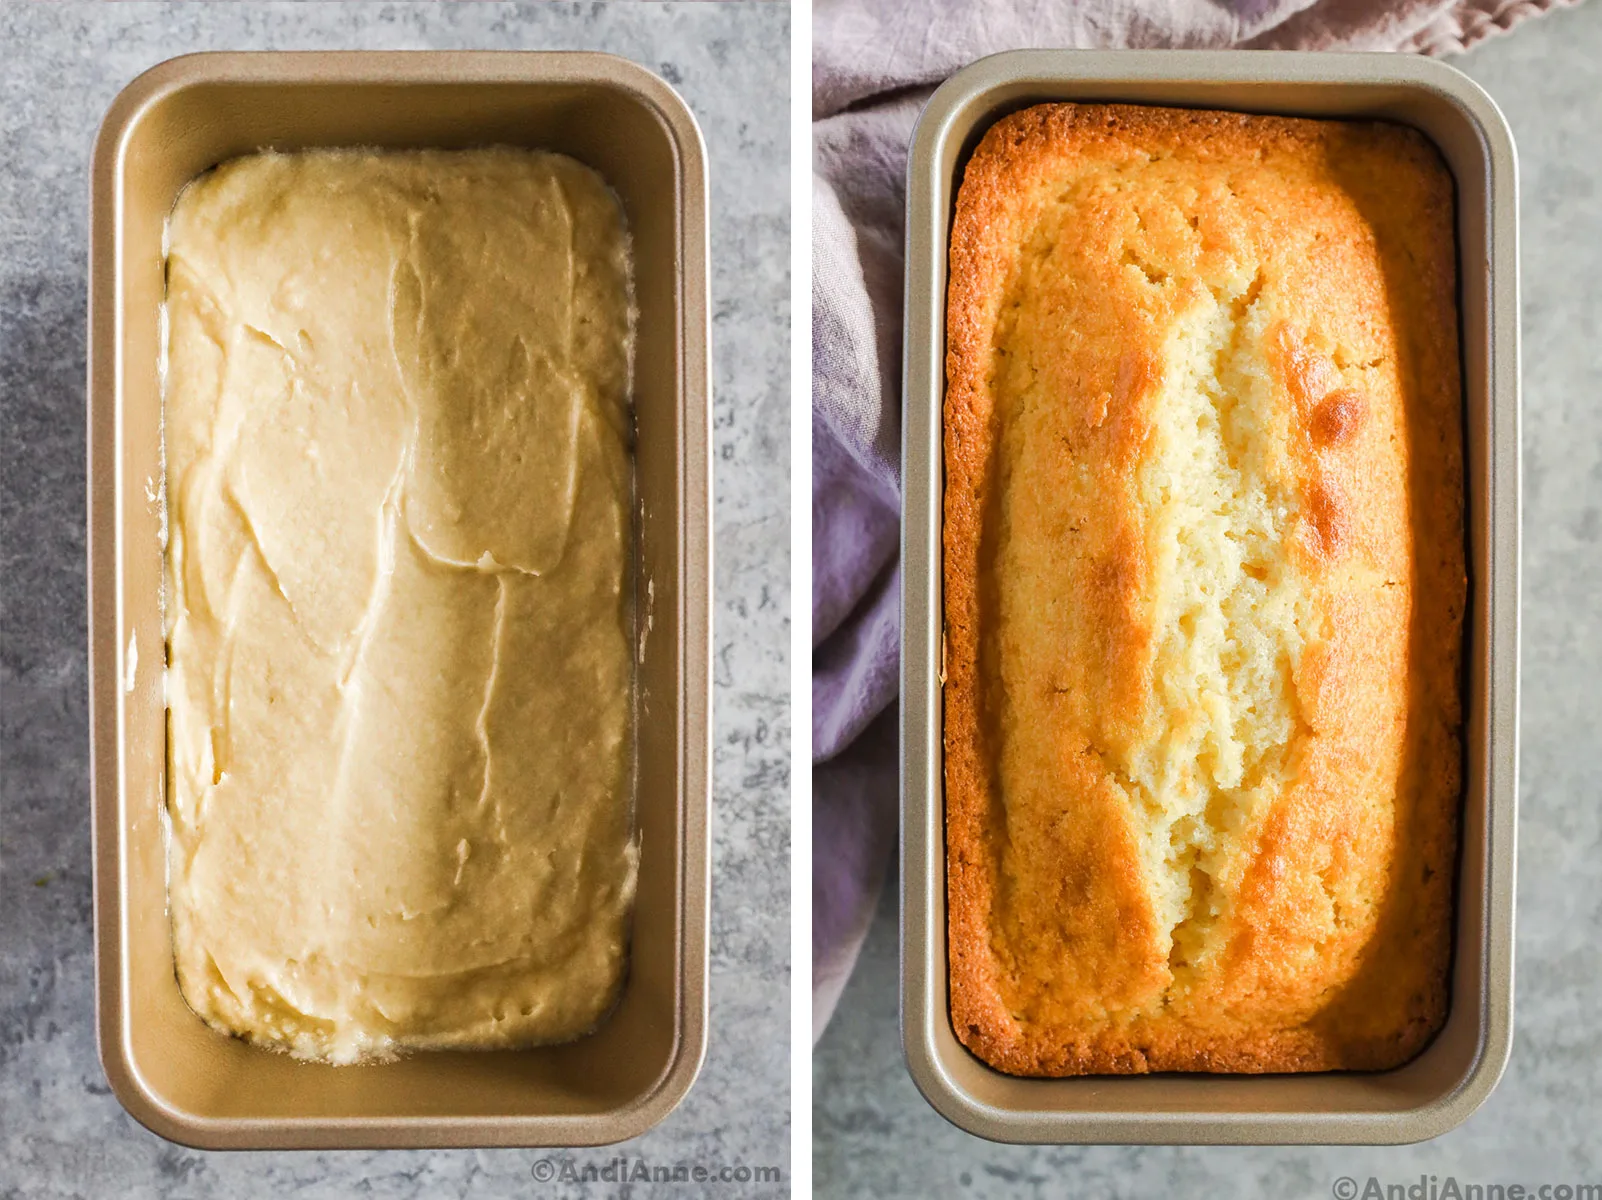 Unbaked pound cake in loaf pan, then baked version.